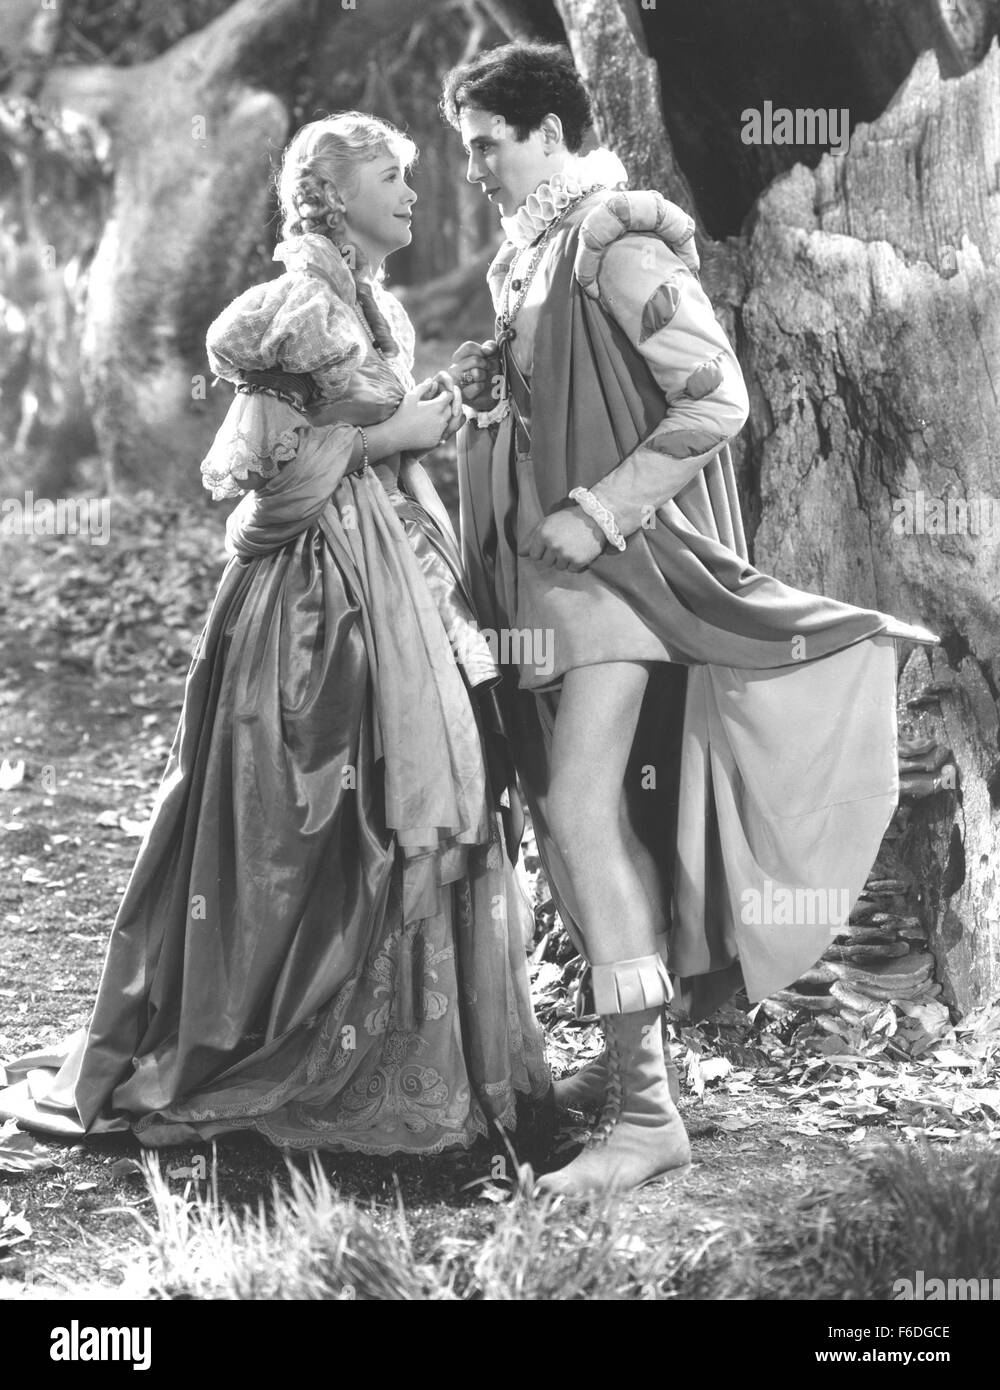 RELEASE DATE: October 30, 1935. MOVIE TITLE: A Midsummer Night's Dream. STUDIO: Warner Bros. Pictures. PLOT: Theseus, Duke of Athens, is going to marry Hyppolyta, Queen of the Amazons. Demetrius is engaged with Hermia, but Hermia loves Lysander. Helena loves Demetrius. Oberon and Titania, of the kingdom of fairies have a slight quarrel about whether or not the boy Titania is raising will join Titania's band or Oberon's, so Oberon tries to get him from her by using some magic. But they're not alone in that forest.Lysander and Hermina have there a rendezvous, Helena and Demetrius are there, too Stock Photo